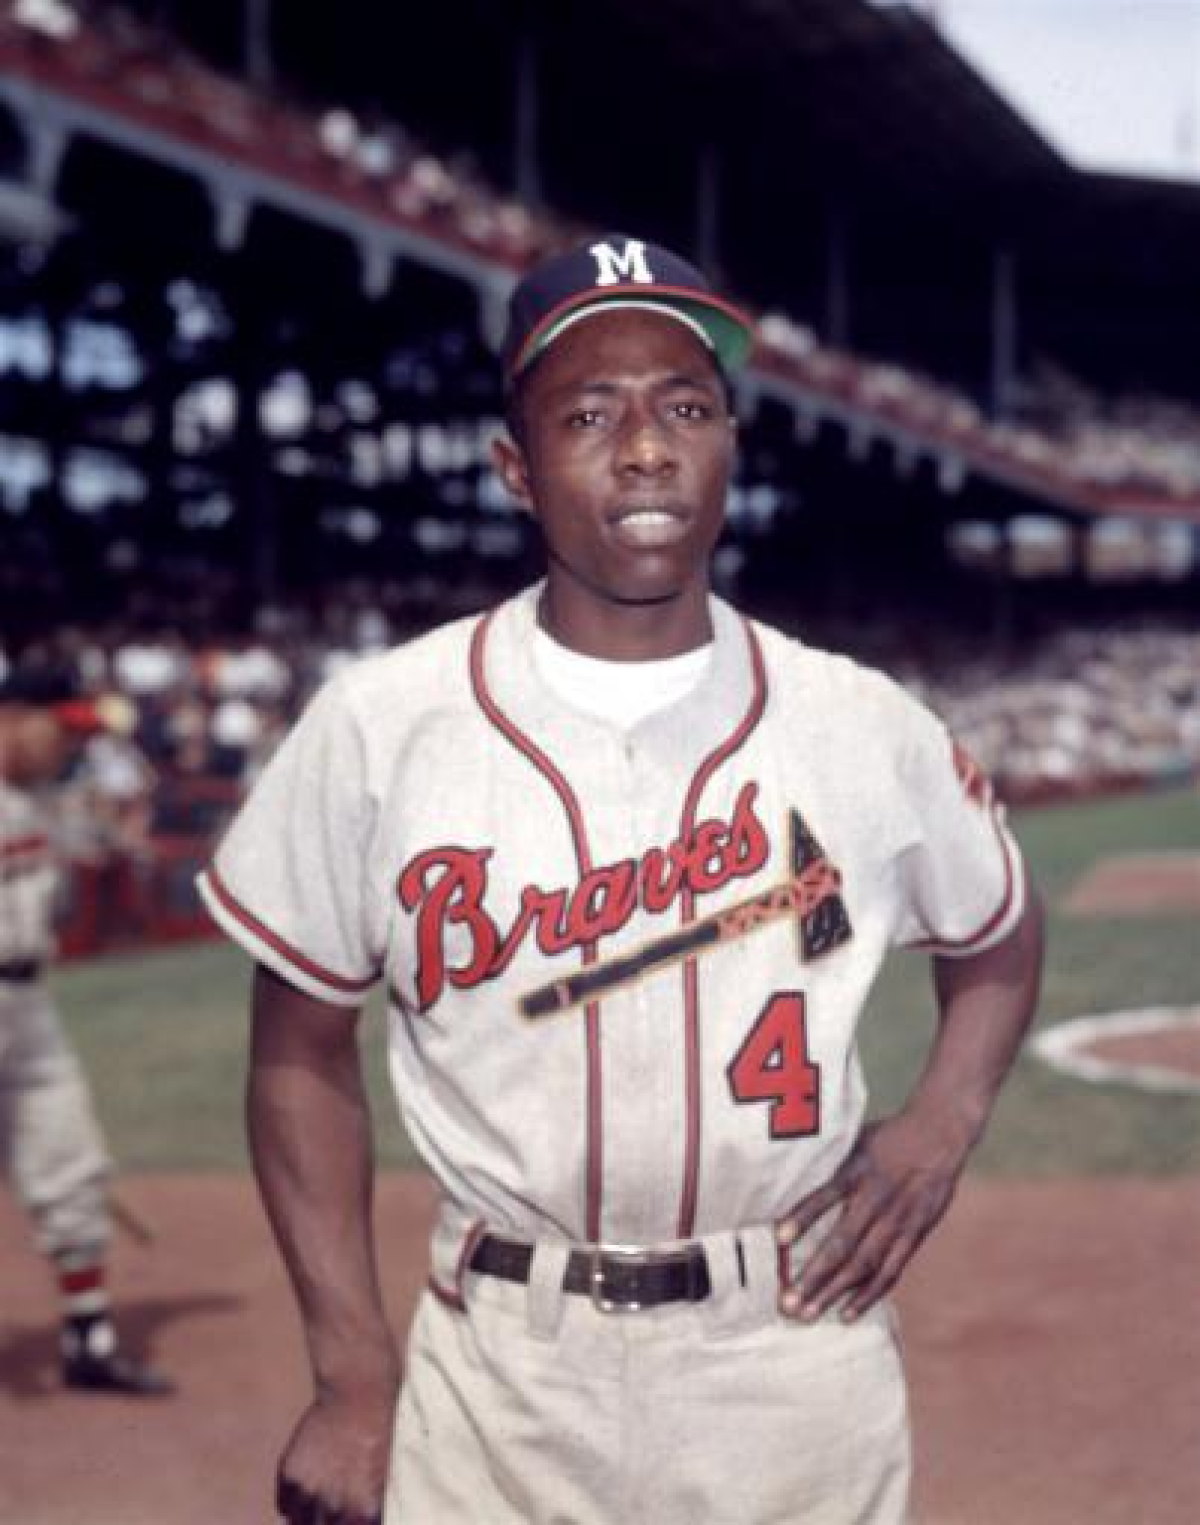 Milwaukee Braves outfielder Hank Aaron stands on the field before an exhibition game.